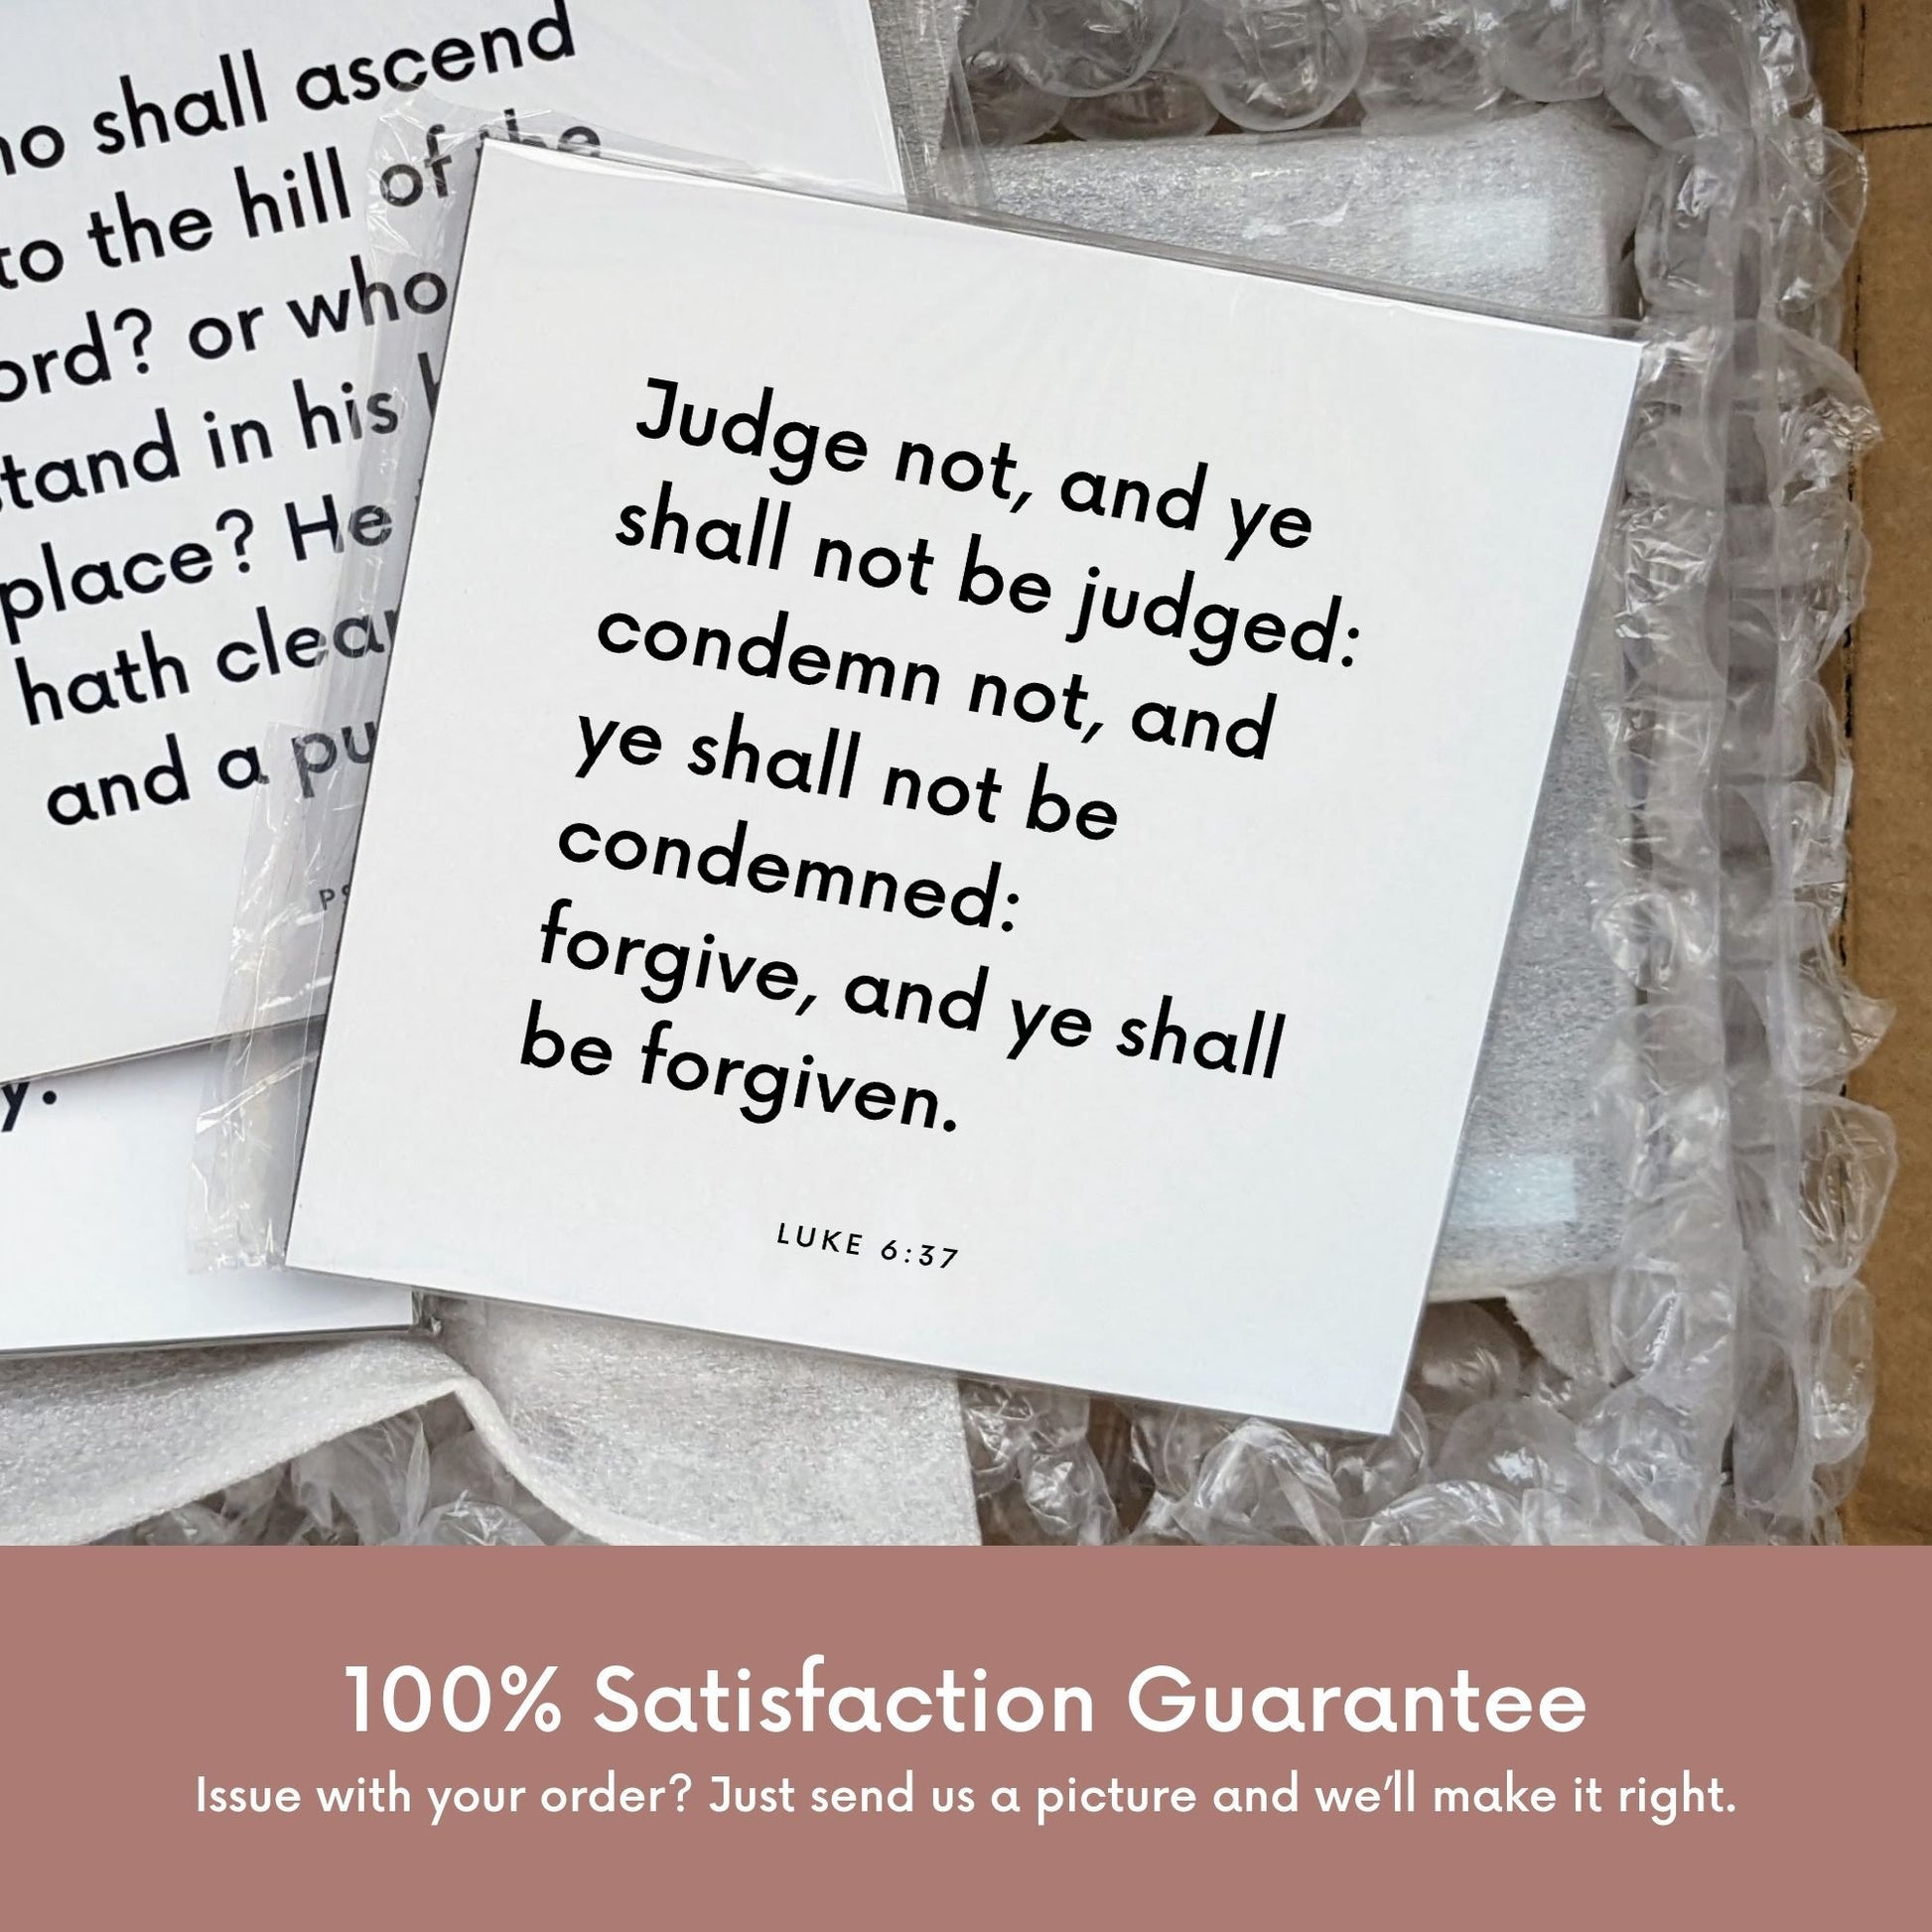 Shipping materials for scripture tile of Luke 6:37 - "Judge not, and ye shall not be judged"